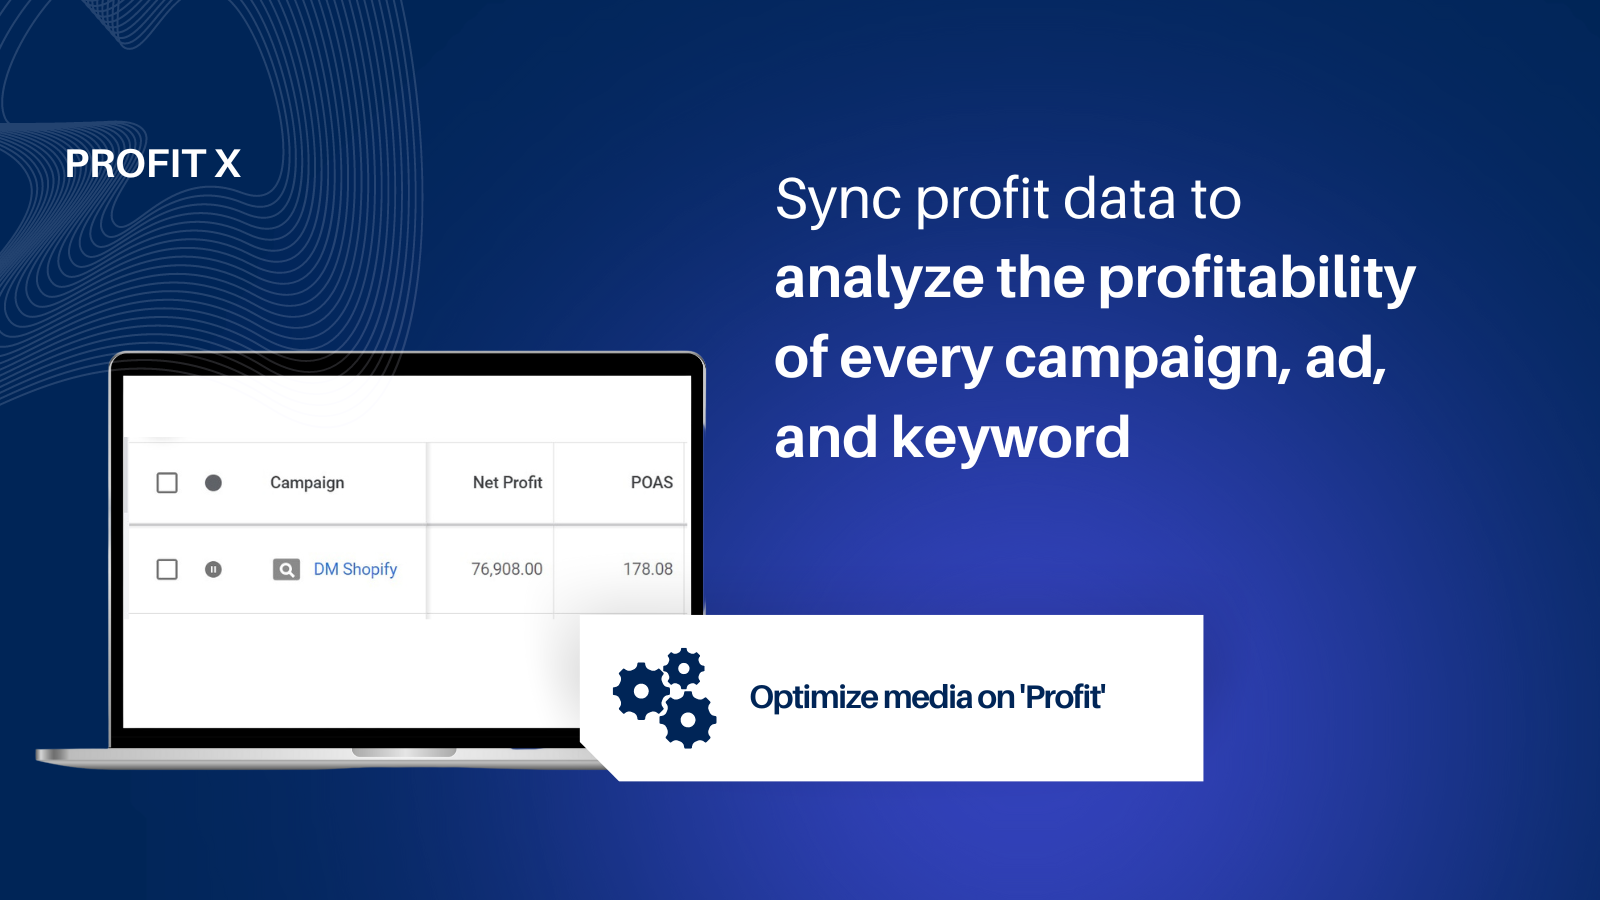 Report Profit, Net Revenue data in any view